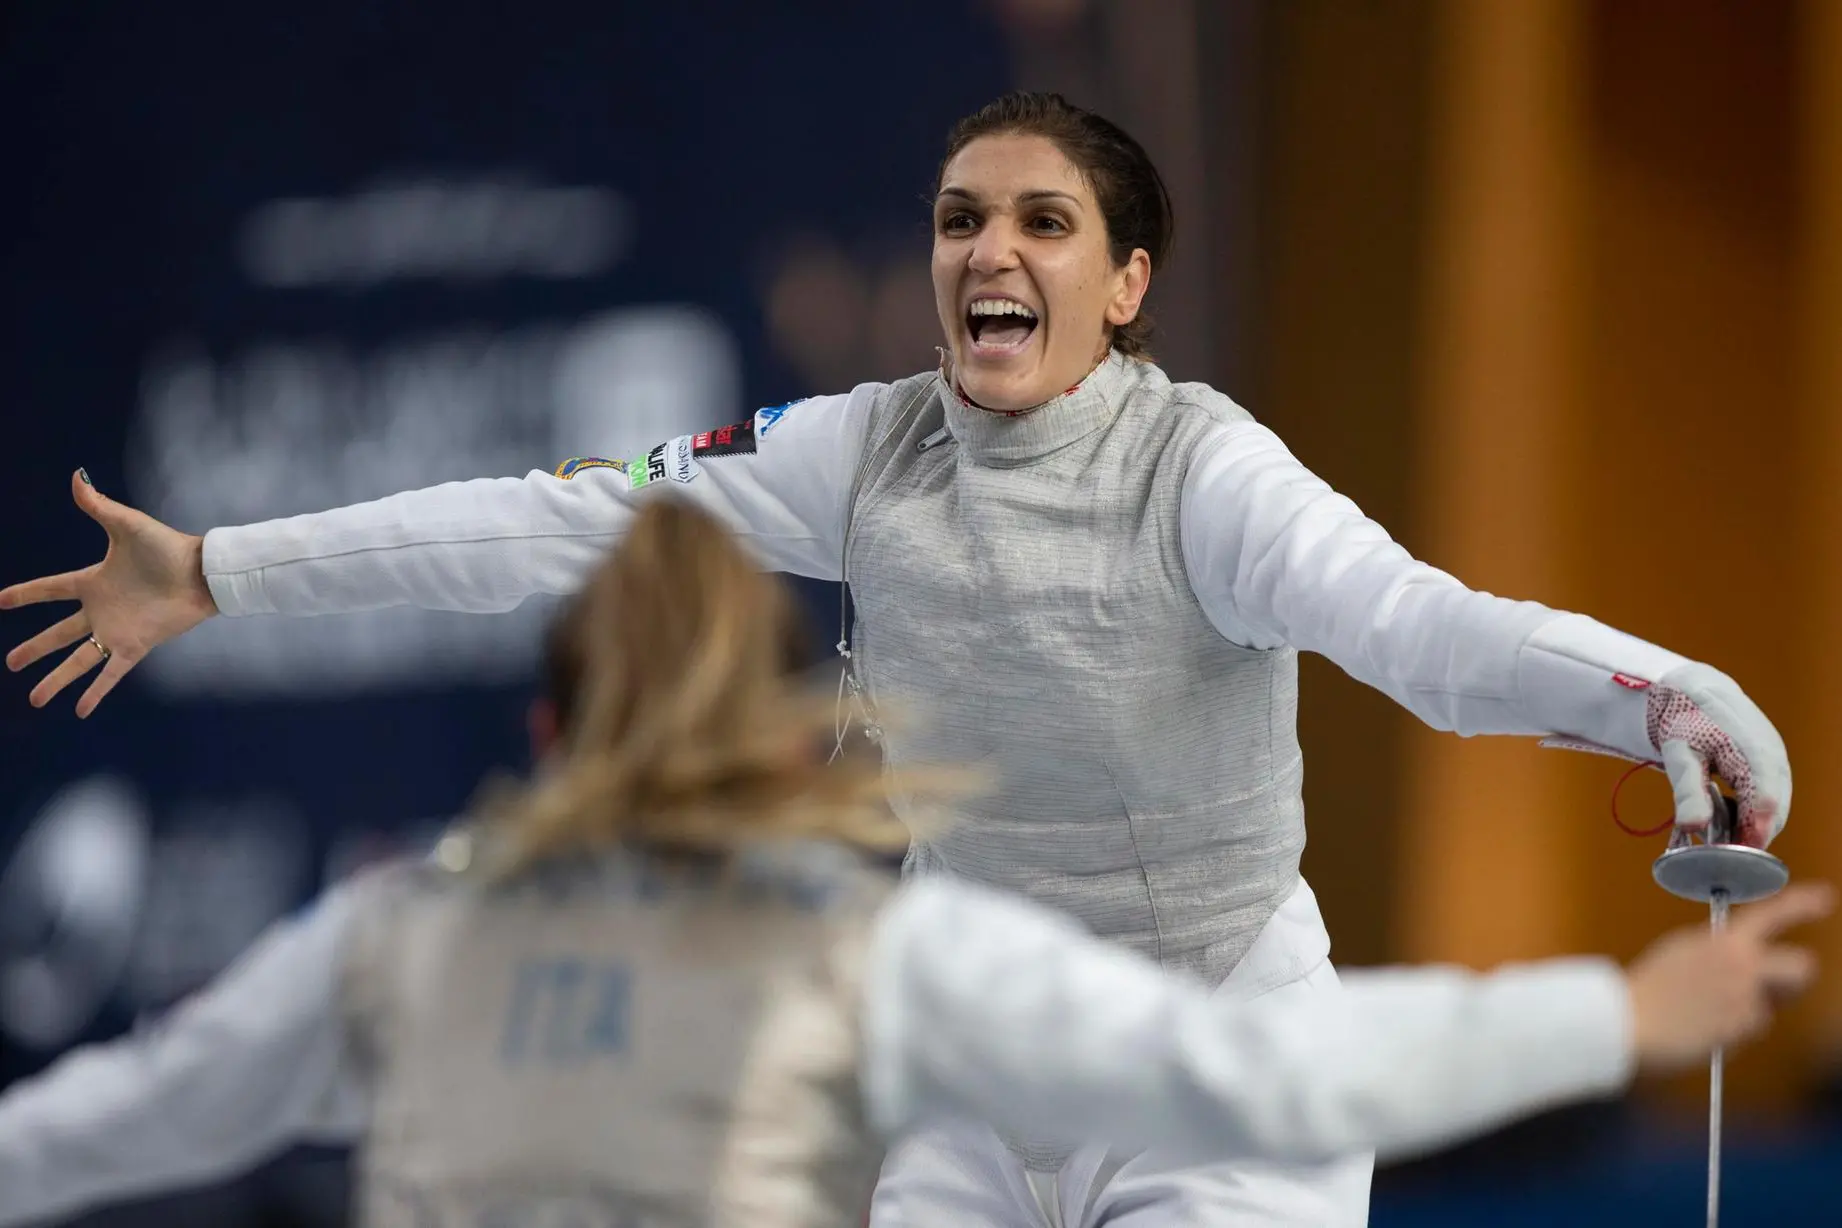 epa10086614 Arianna Errigo of Italy celebrates after winning against the USA in the Senior Team Women's Foil gold medal match at the Fencing World Championships in Cairo, Egypt, 22 July 2022. EPA/MOHAMED HOSSAM